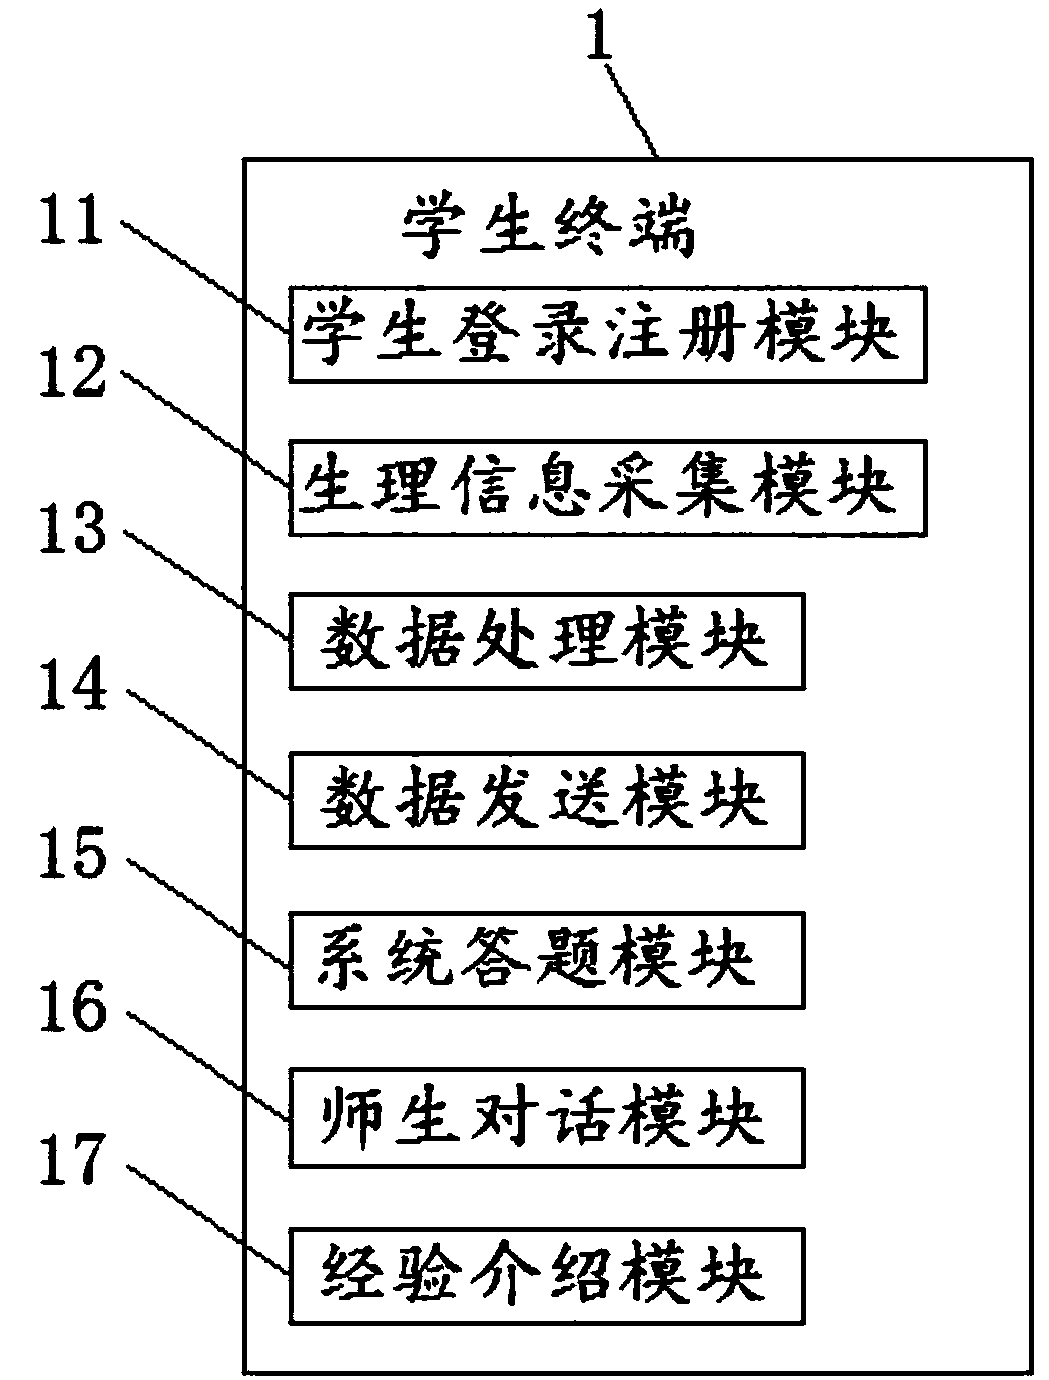 Simulated scene-based career assessment system and method